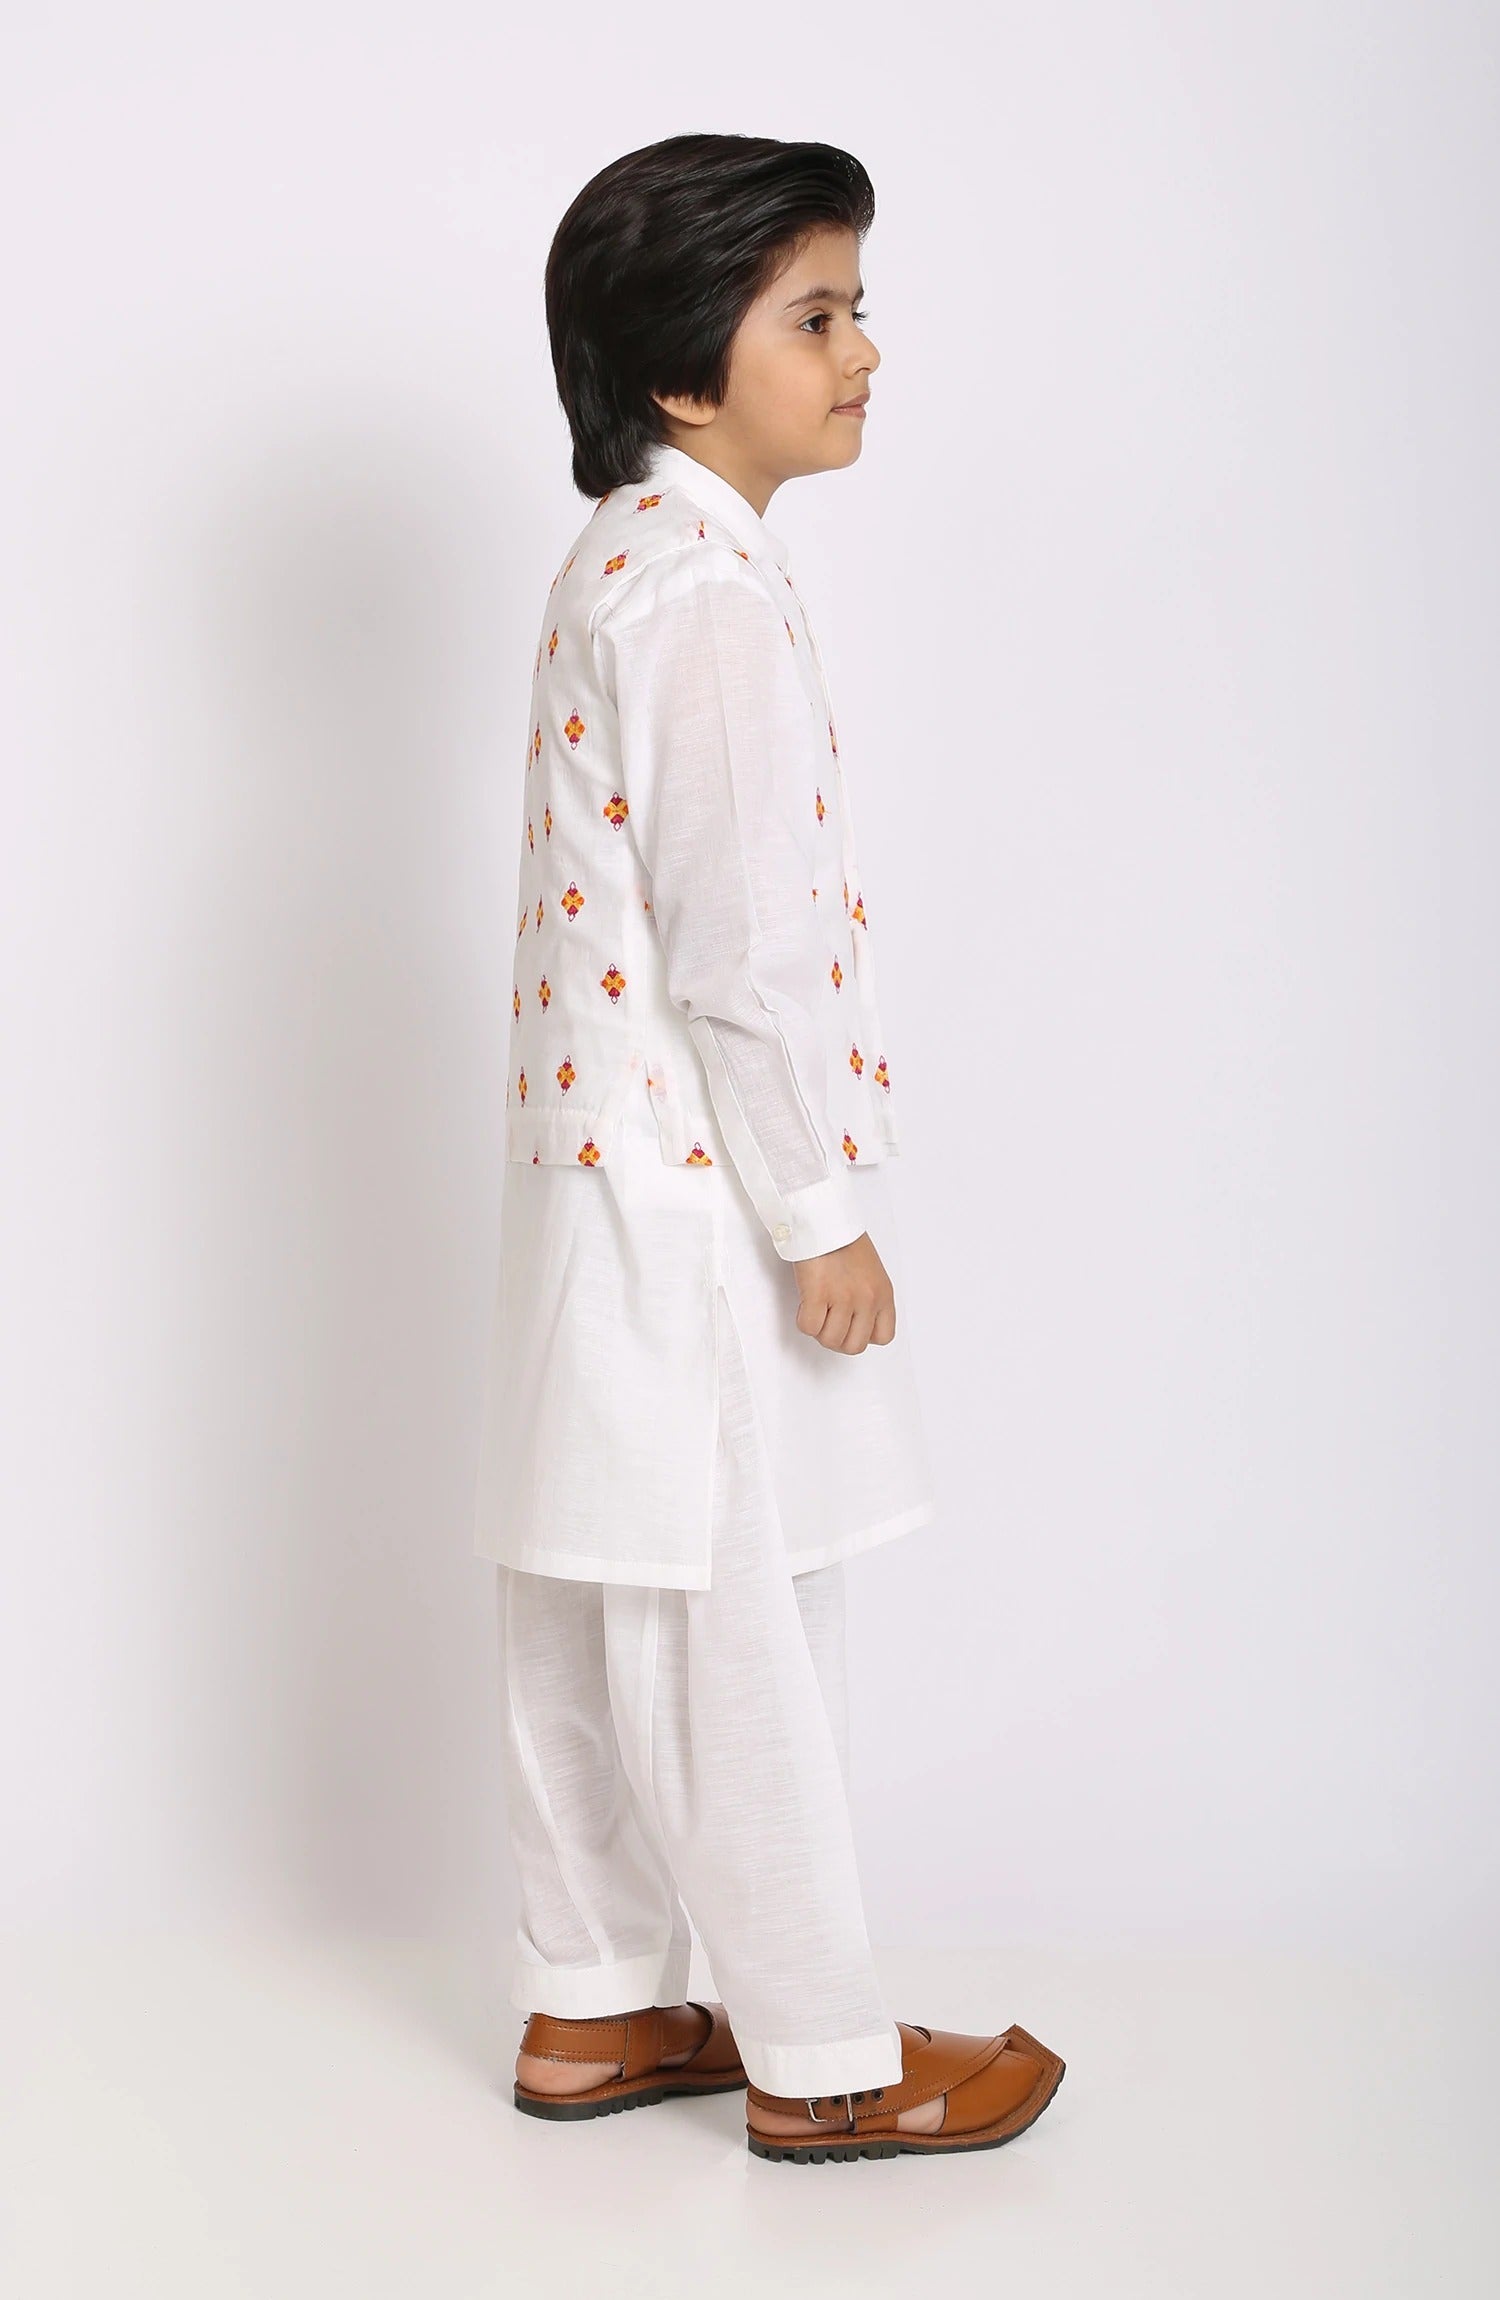 Embroidered Waistcoat Suit